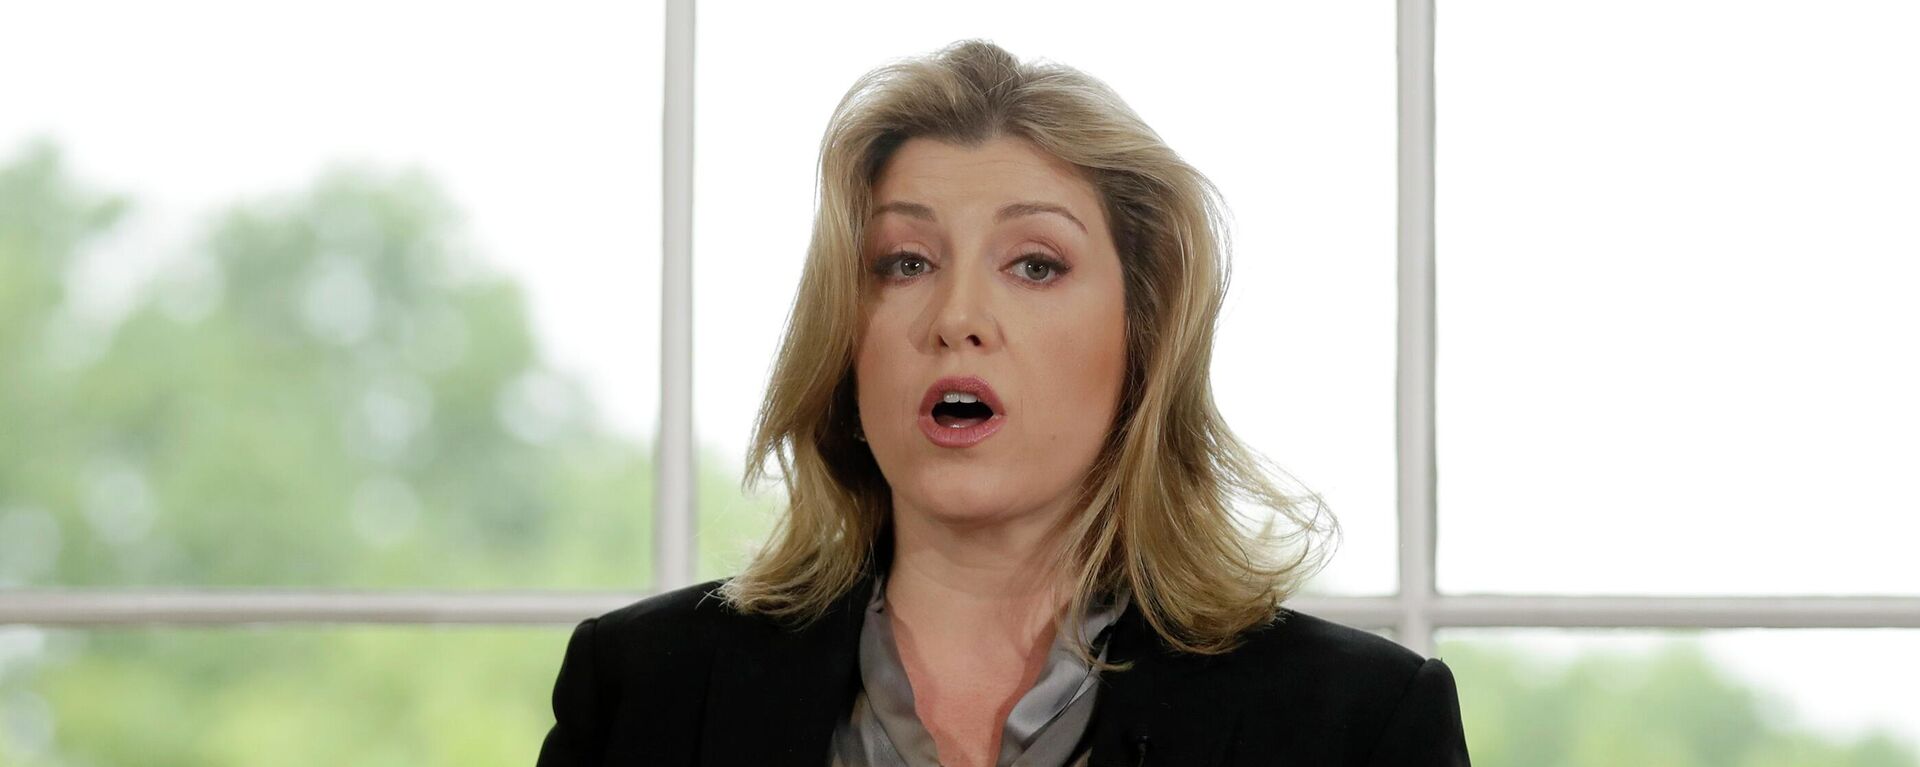 Penny Mordaunt speaks ahead of Foreign Secretary Jeremy Hunt launching his leadership campaign for the Conservative Party in London, June 10, 2019 - Sputnik International, 1920, 12.07.2022